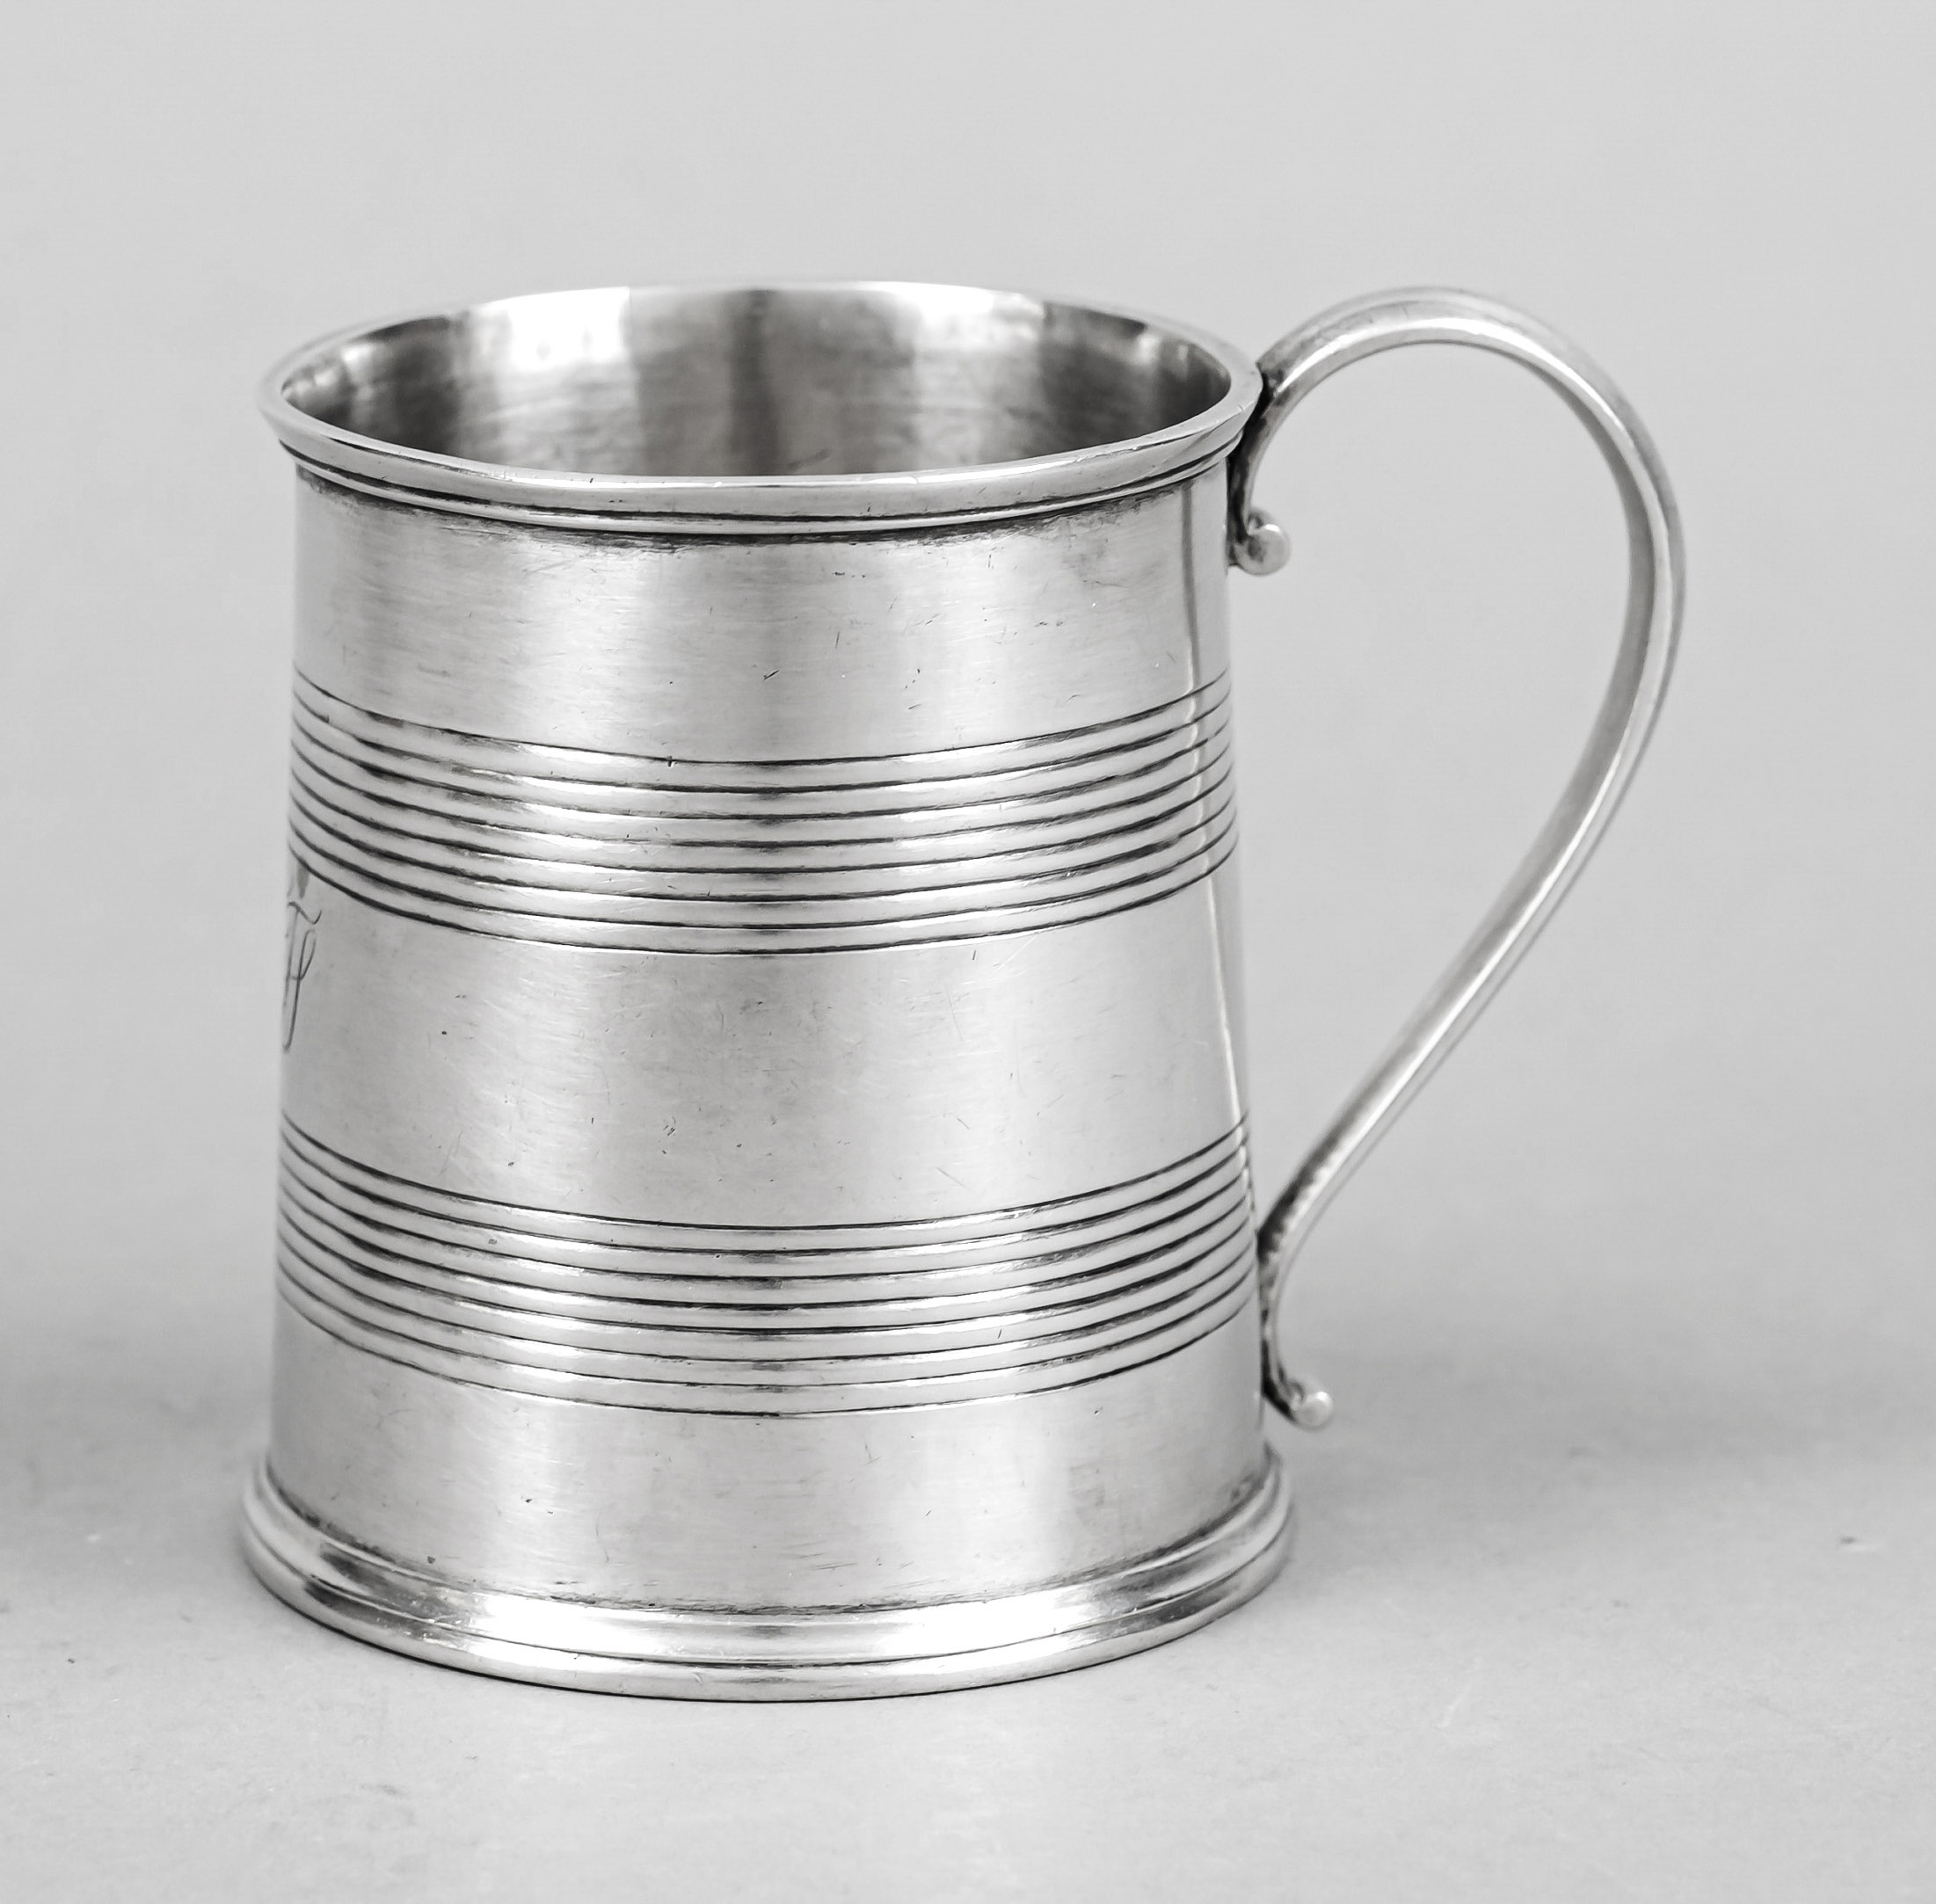 Mug, c. 1900, marked F. Saurier, silver tested, round profiled stand, body with tapering wall, ear